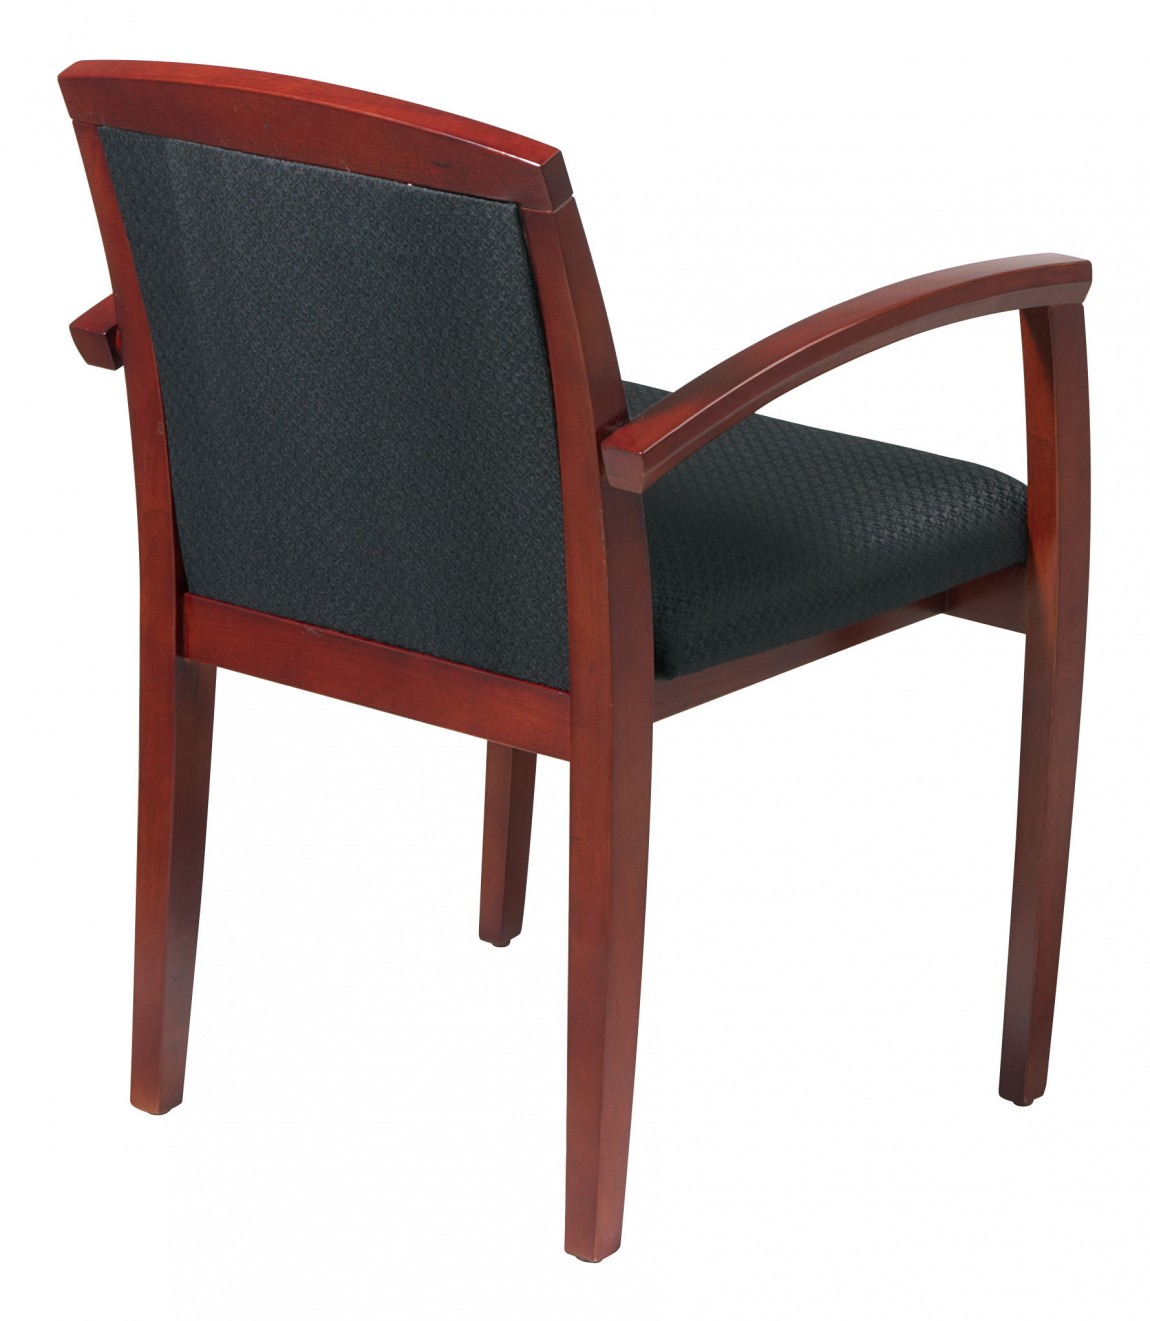 Hardwood Reception Chair - Set of Two